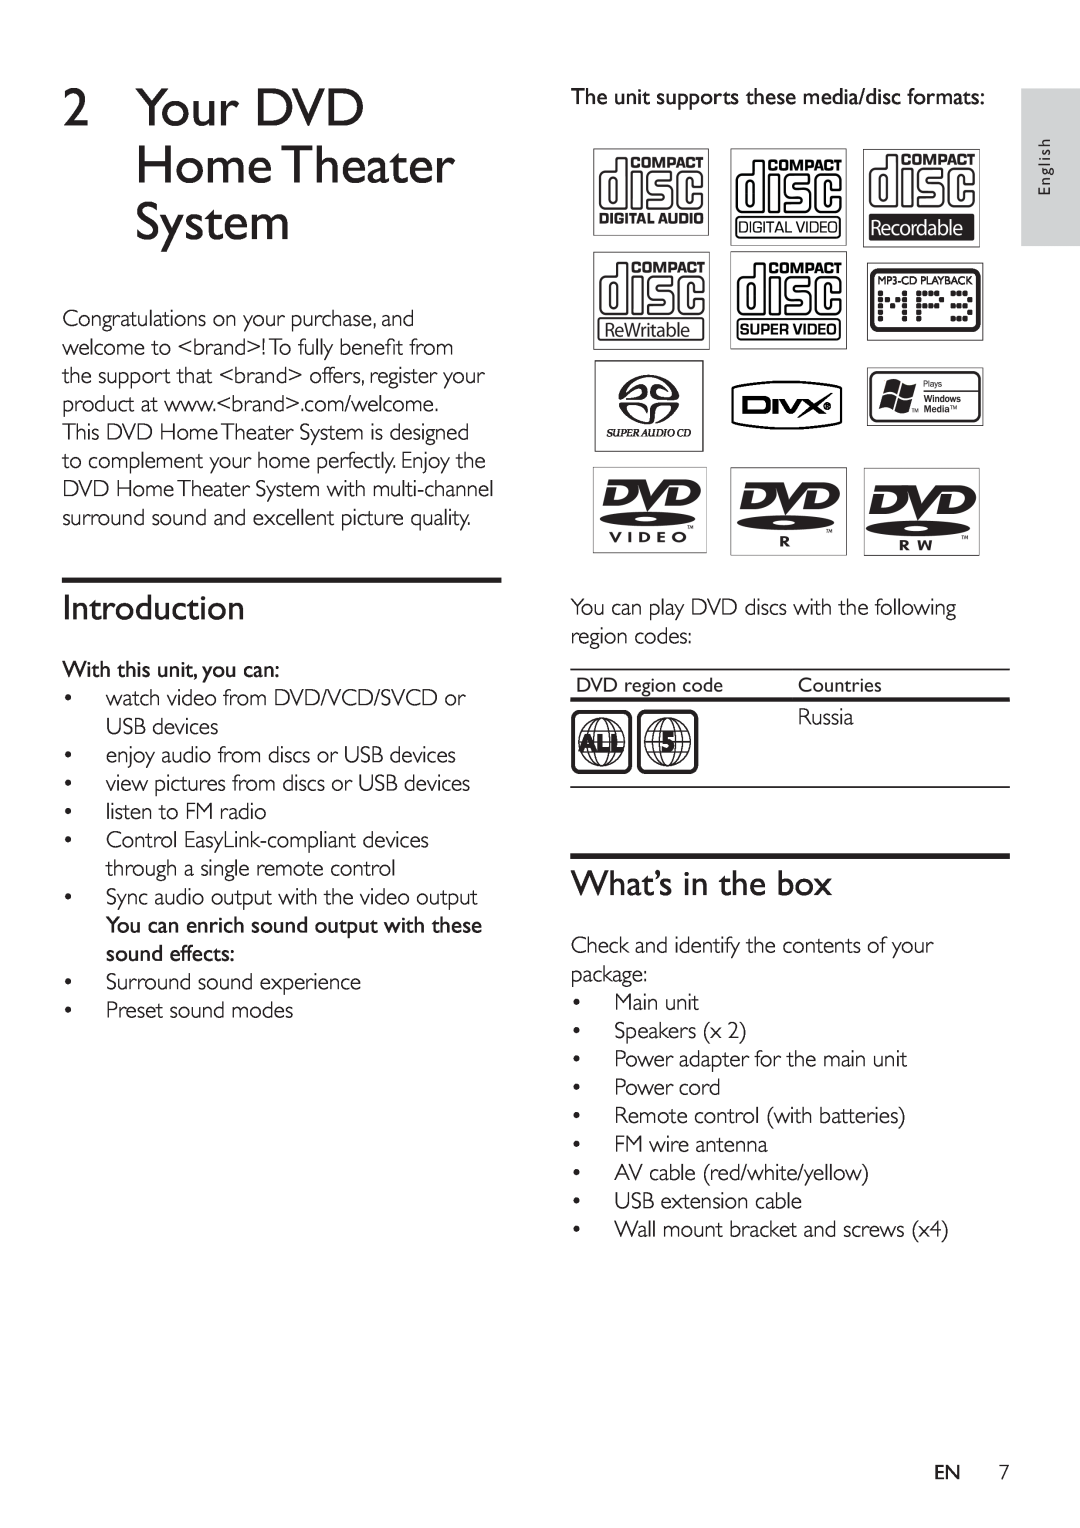 Philips HSB2351/51 user manual 2Your DVD Home Theater System, Introduction, What’s in the box, Recordable 